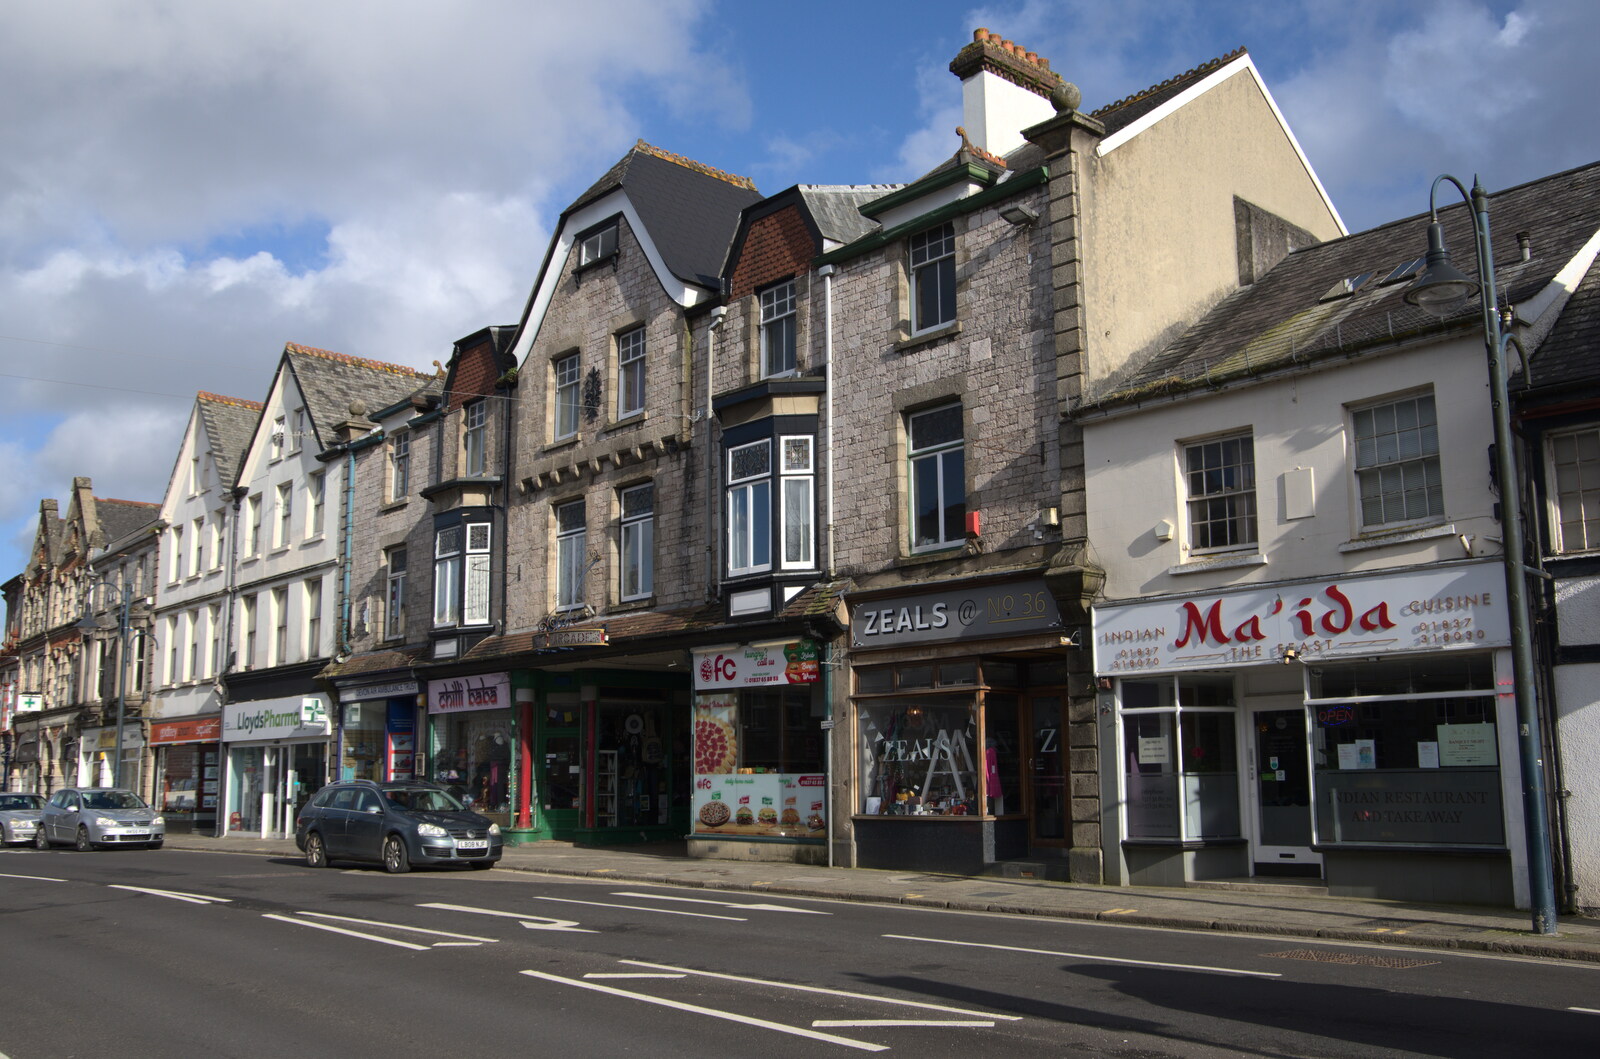 Ma'ida on Fore Street from Chilli Farms, Okehampton and the Oxenham Arms, South Zeal, Devon - 10th April 2023